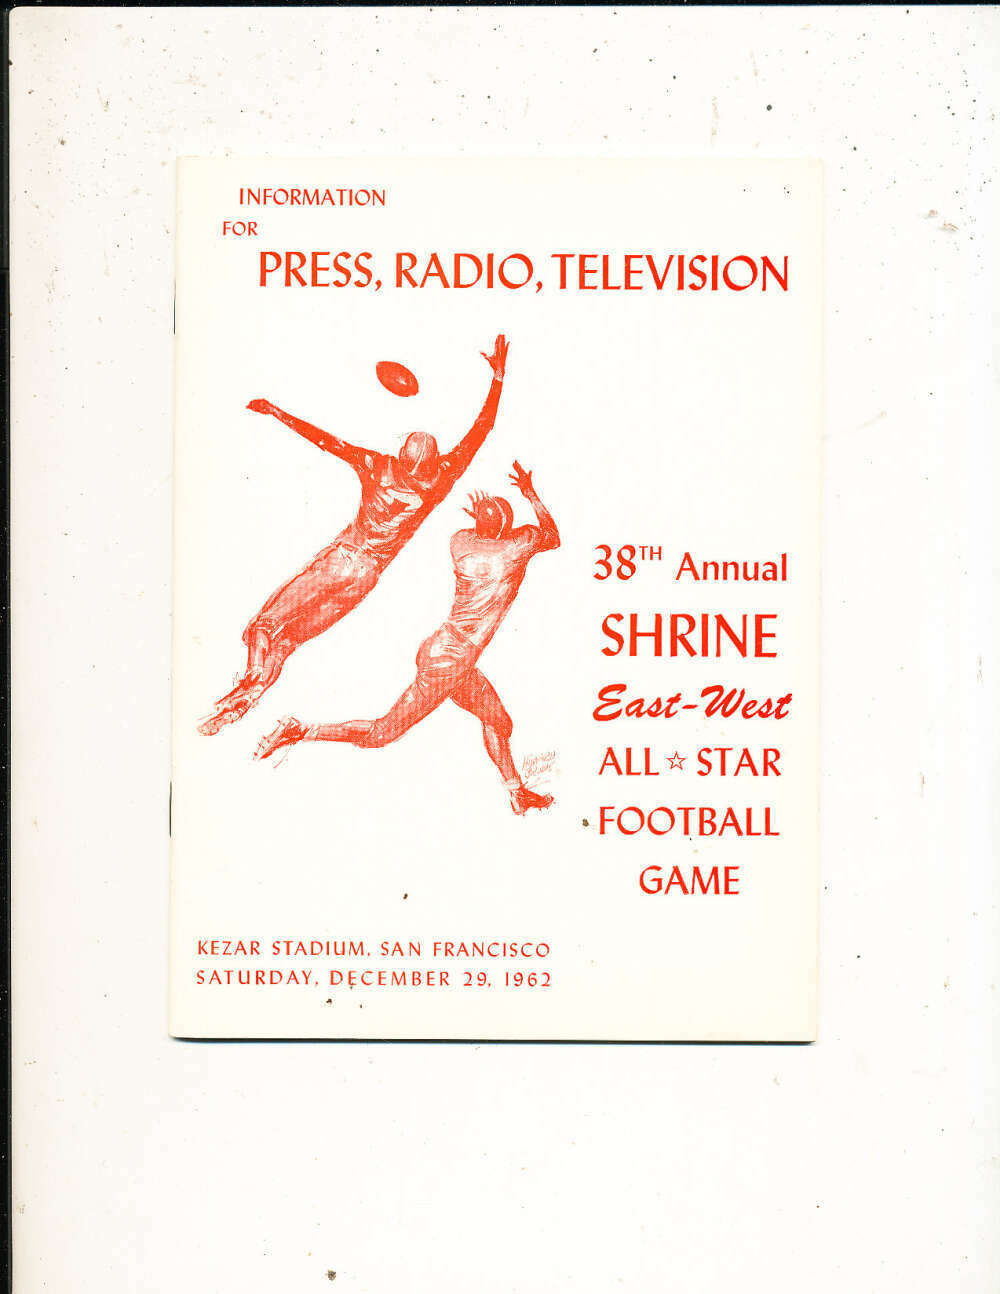 1962 Shrine All Star east west Football Game Press Guide bxconf